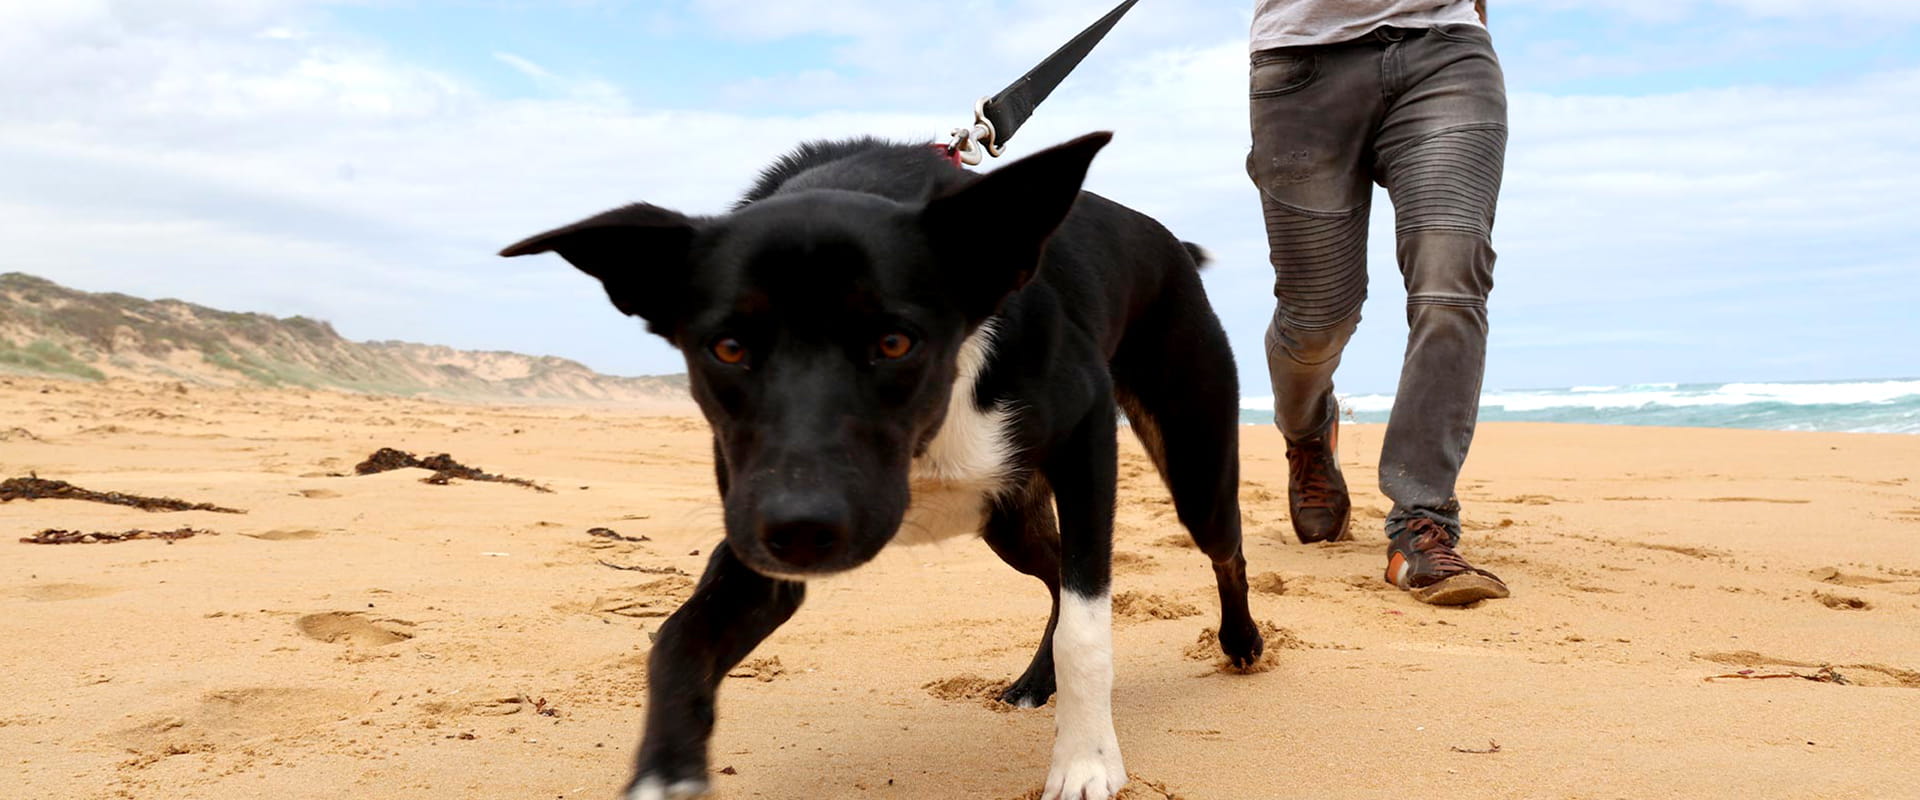 A black and white kelpie dog playfully approaches the camera while the owner holds its lead as they walk along the beach.